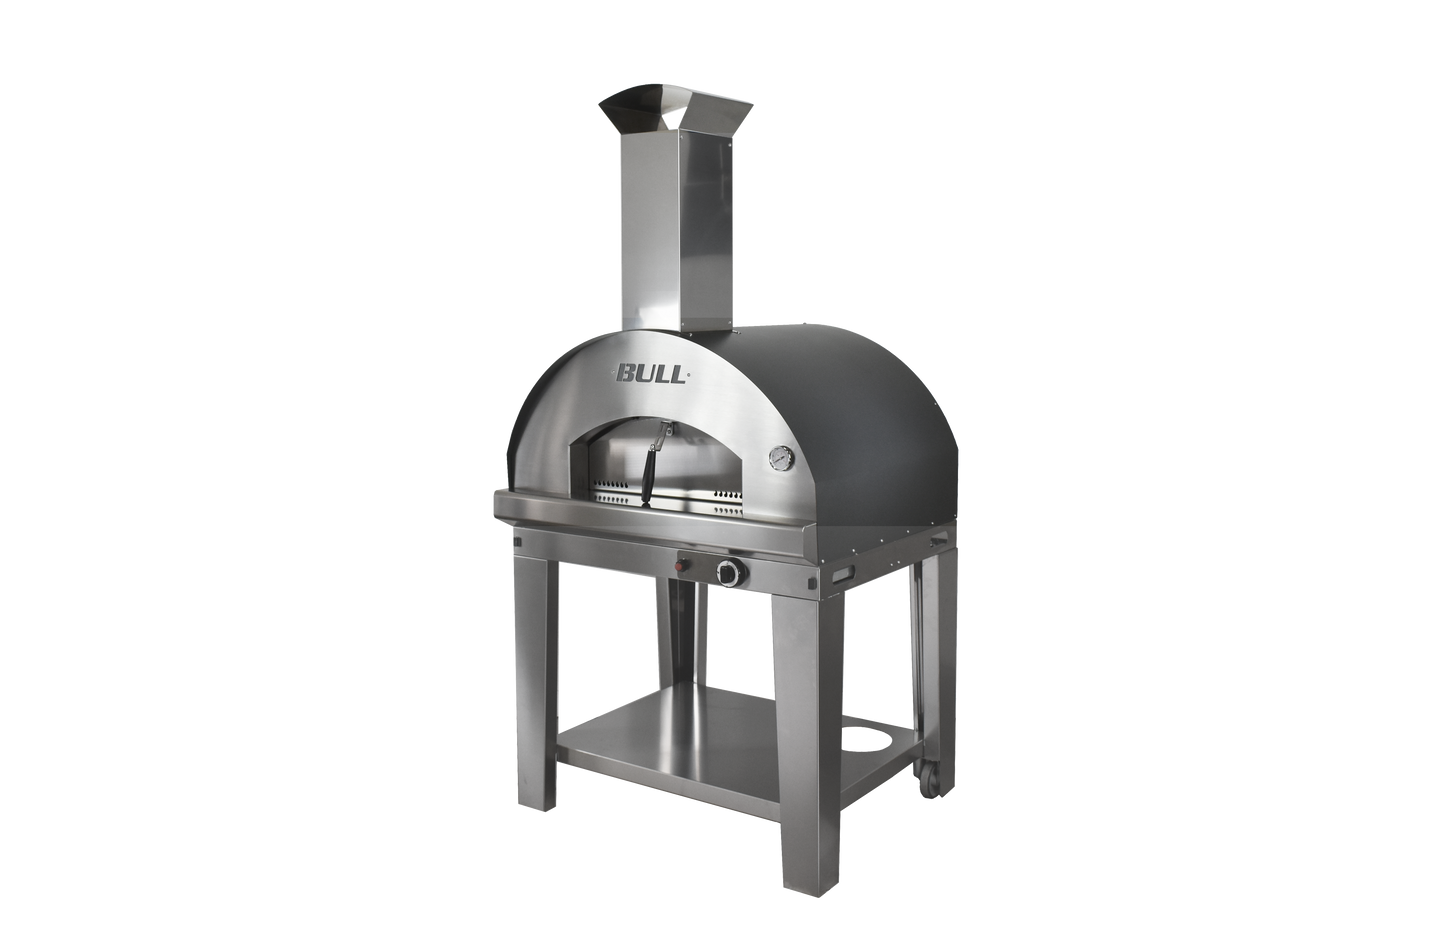 GAS FUELLED Extra Large Pizza Oven 80x60cm Complete Oven And Cart